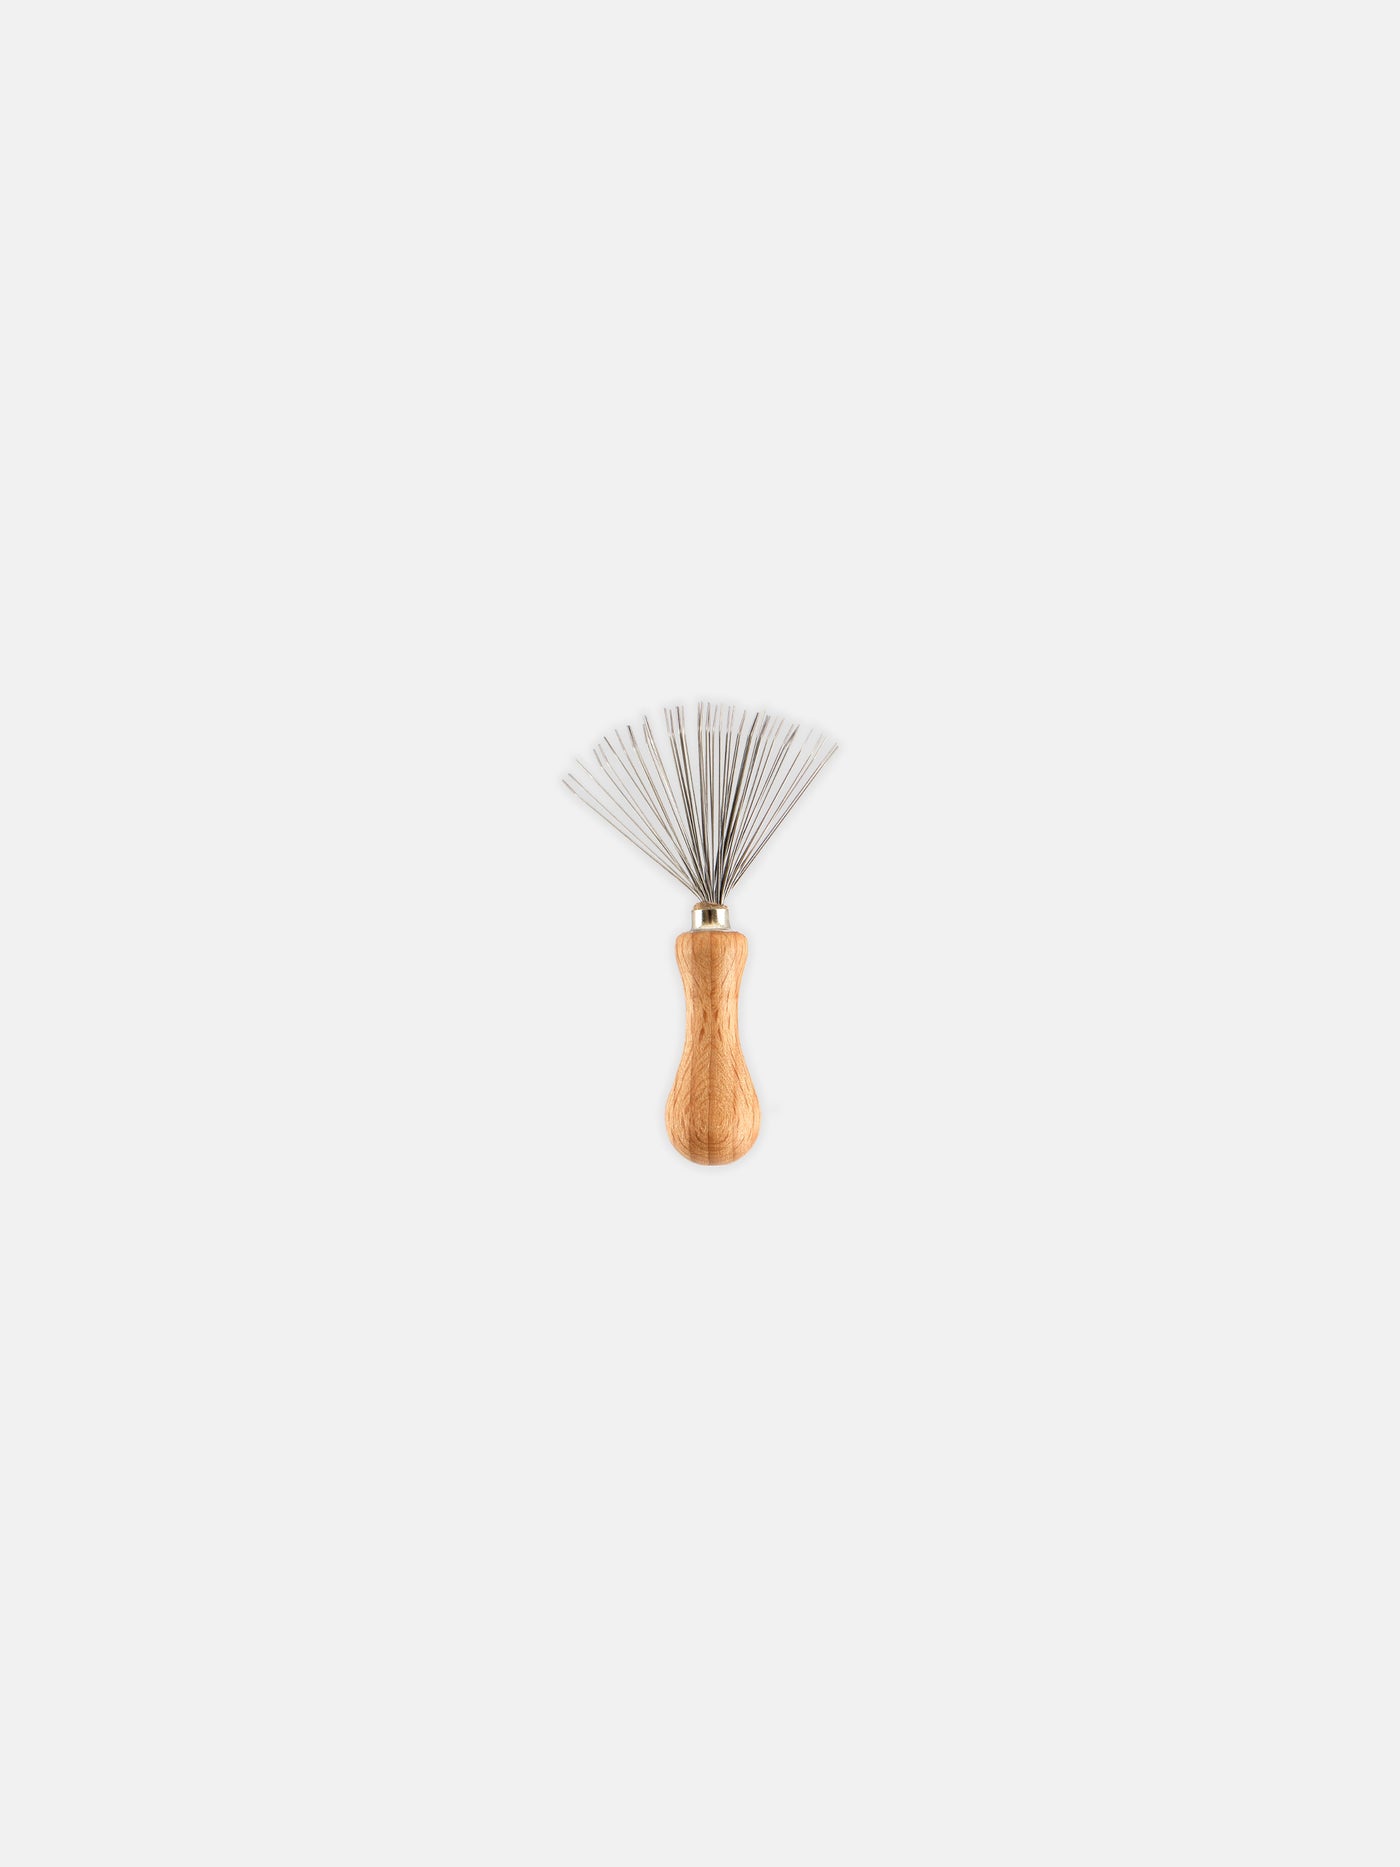 Redecker clothes brush cleaning comb